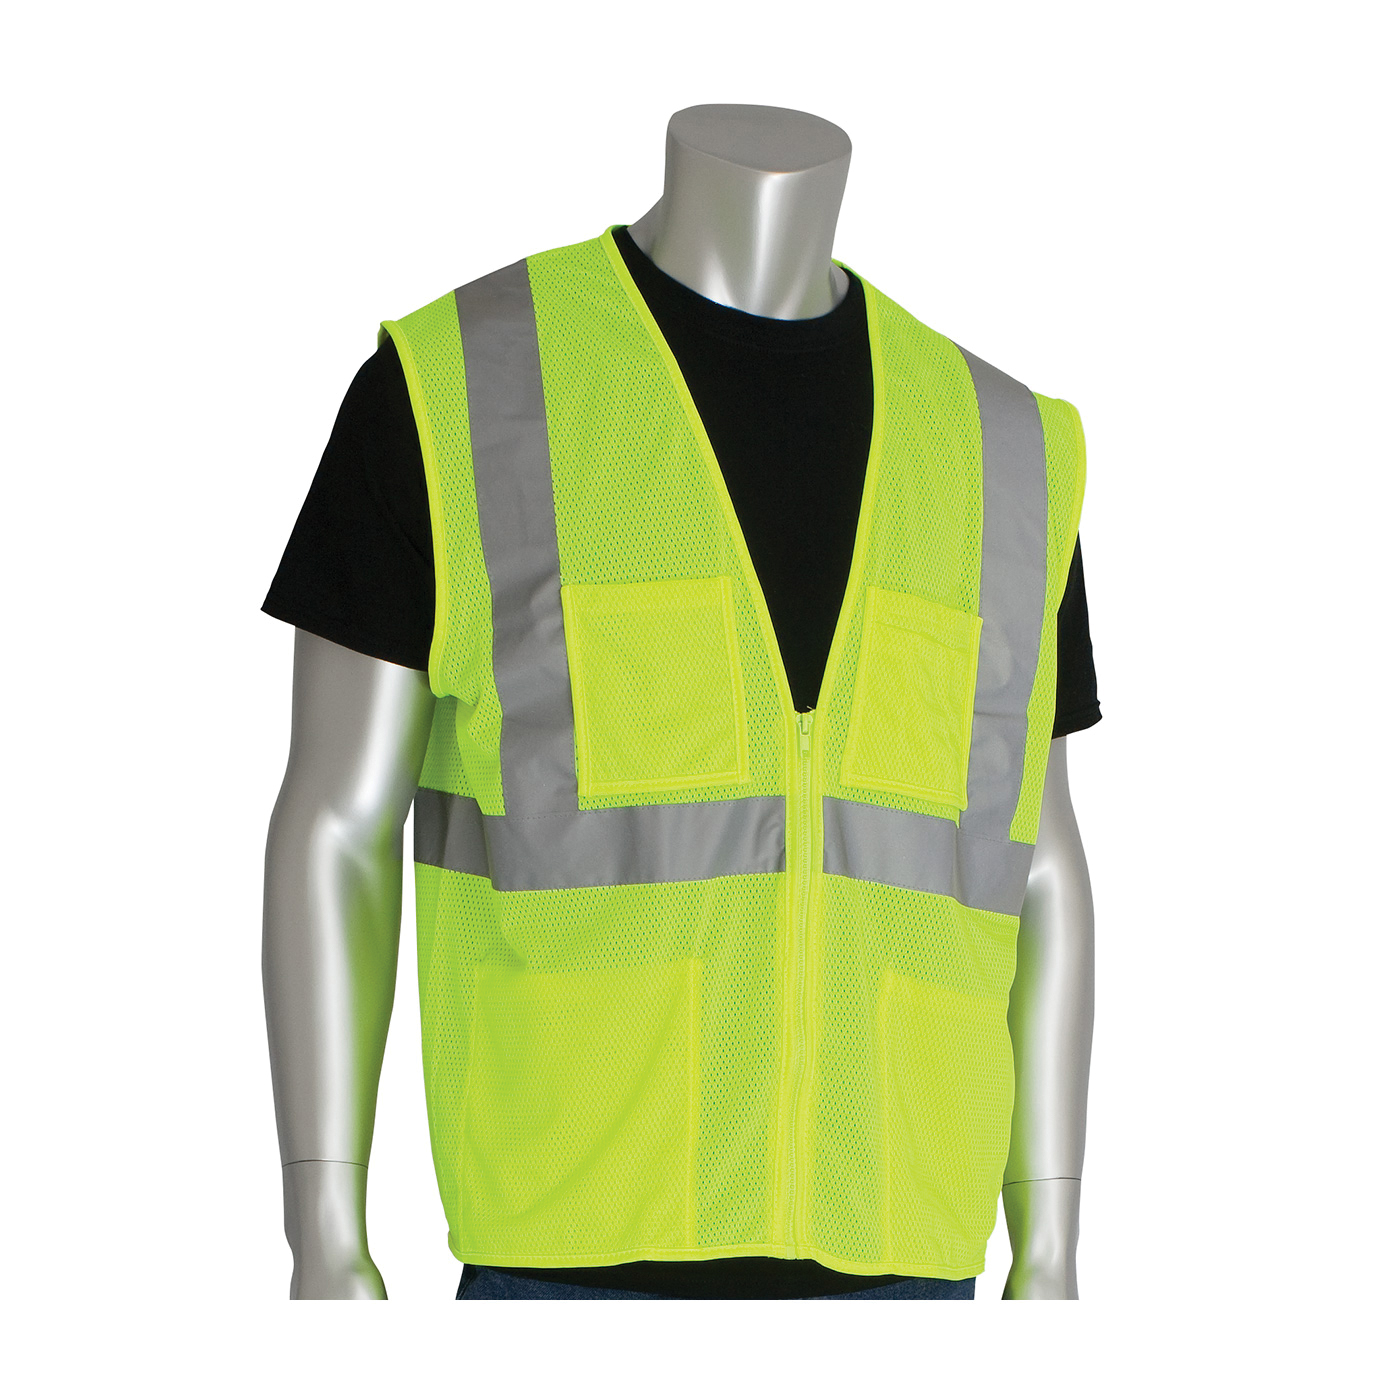 PIP® 302-MVGZ4PLY-M Safety Vest, M, Hi-Viz Lime Yellow, Polyester Mesh, Zipper Closure, 4 Pockets, ANSI Class: Class 2, Specifications Met: ANSI 107 Type R